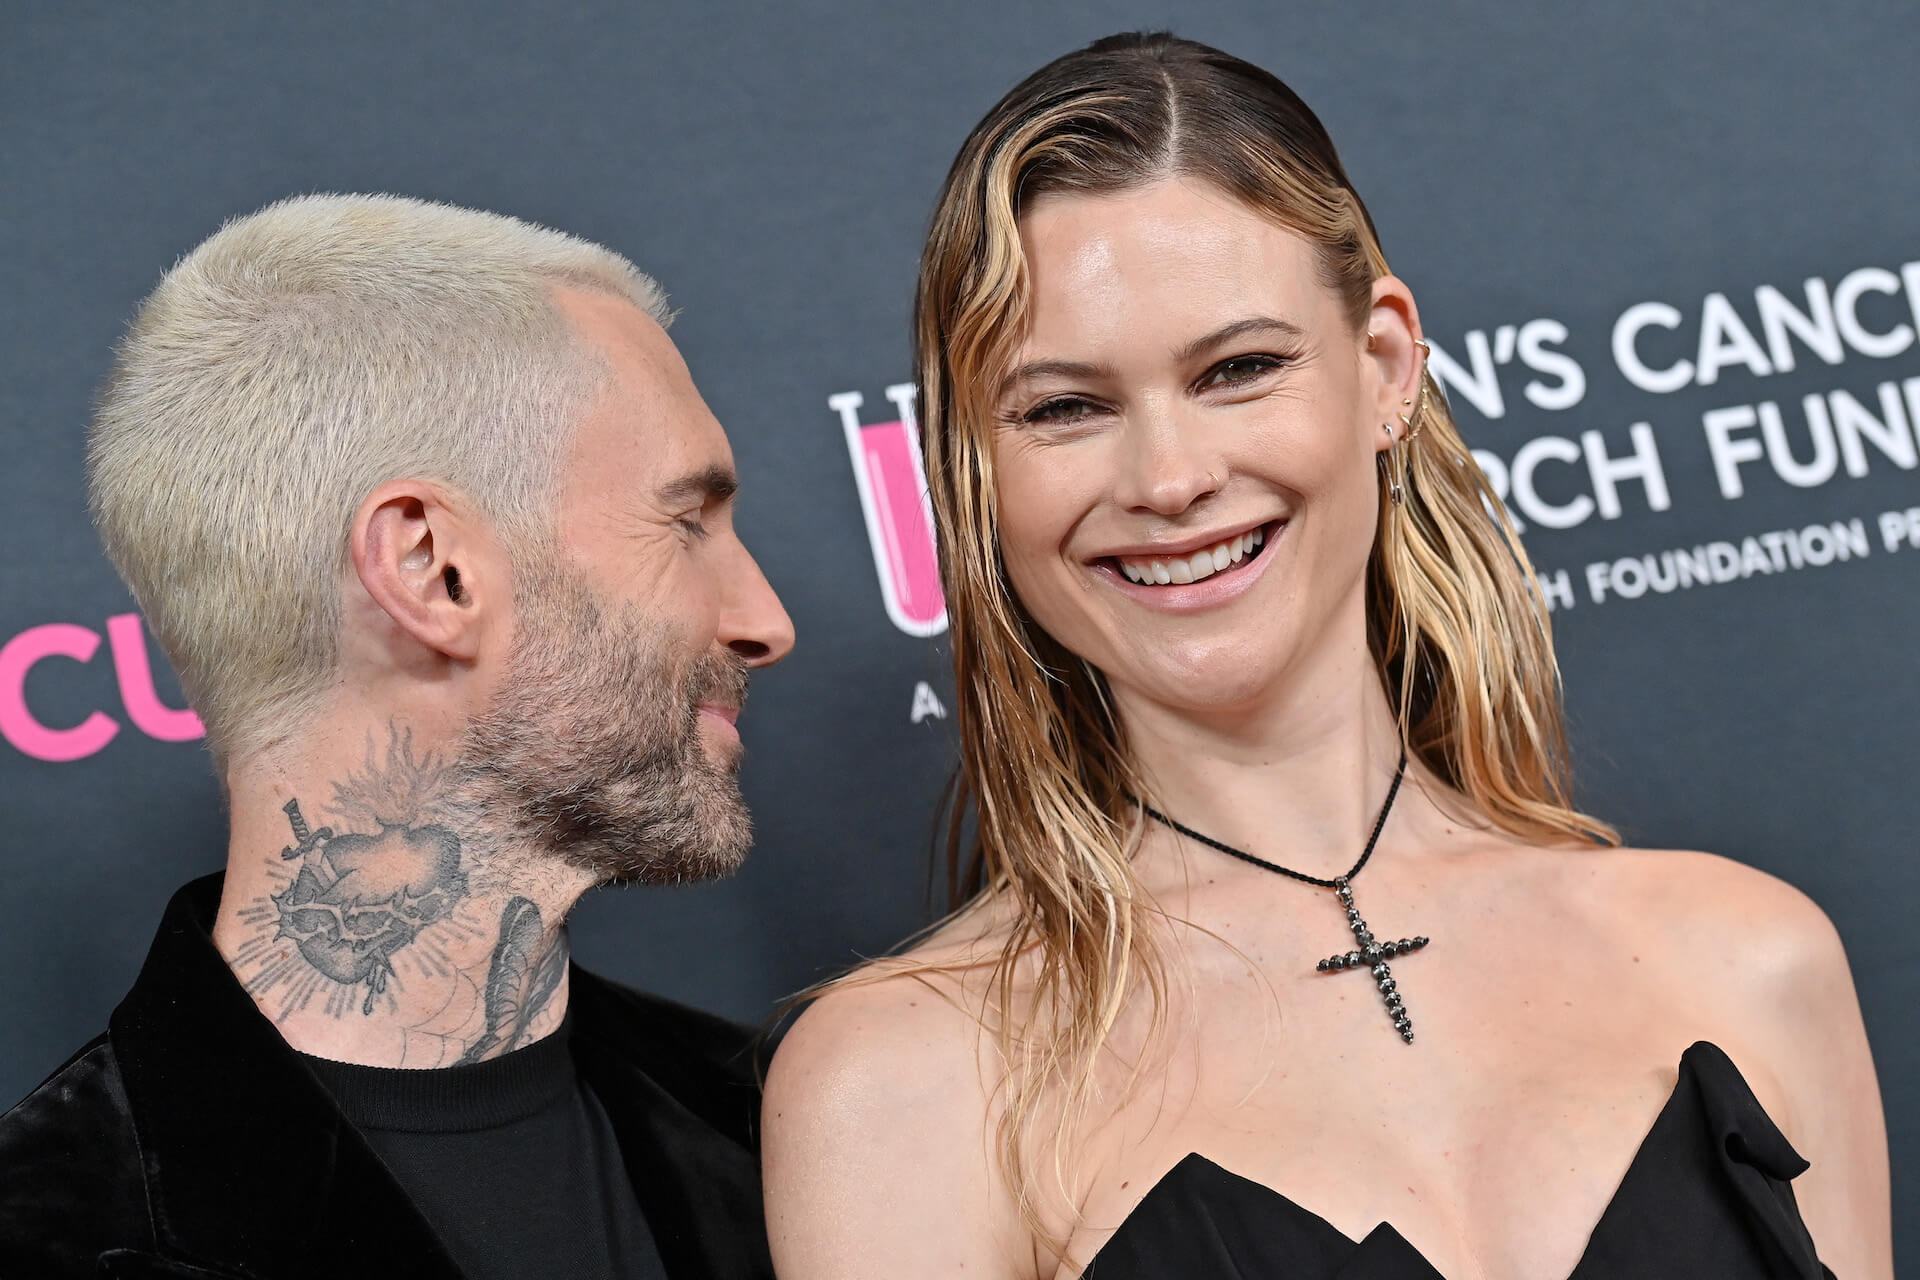 Adam Levine and wife Behati Prinsloo smiling at an event